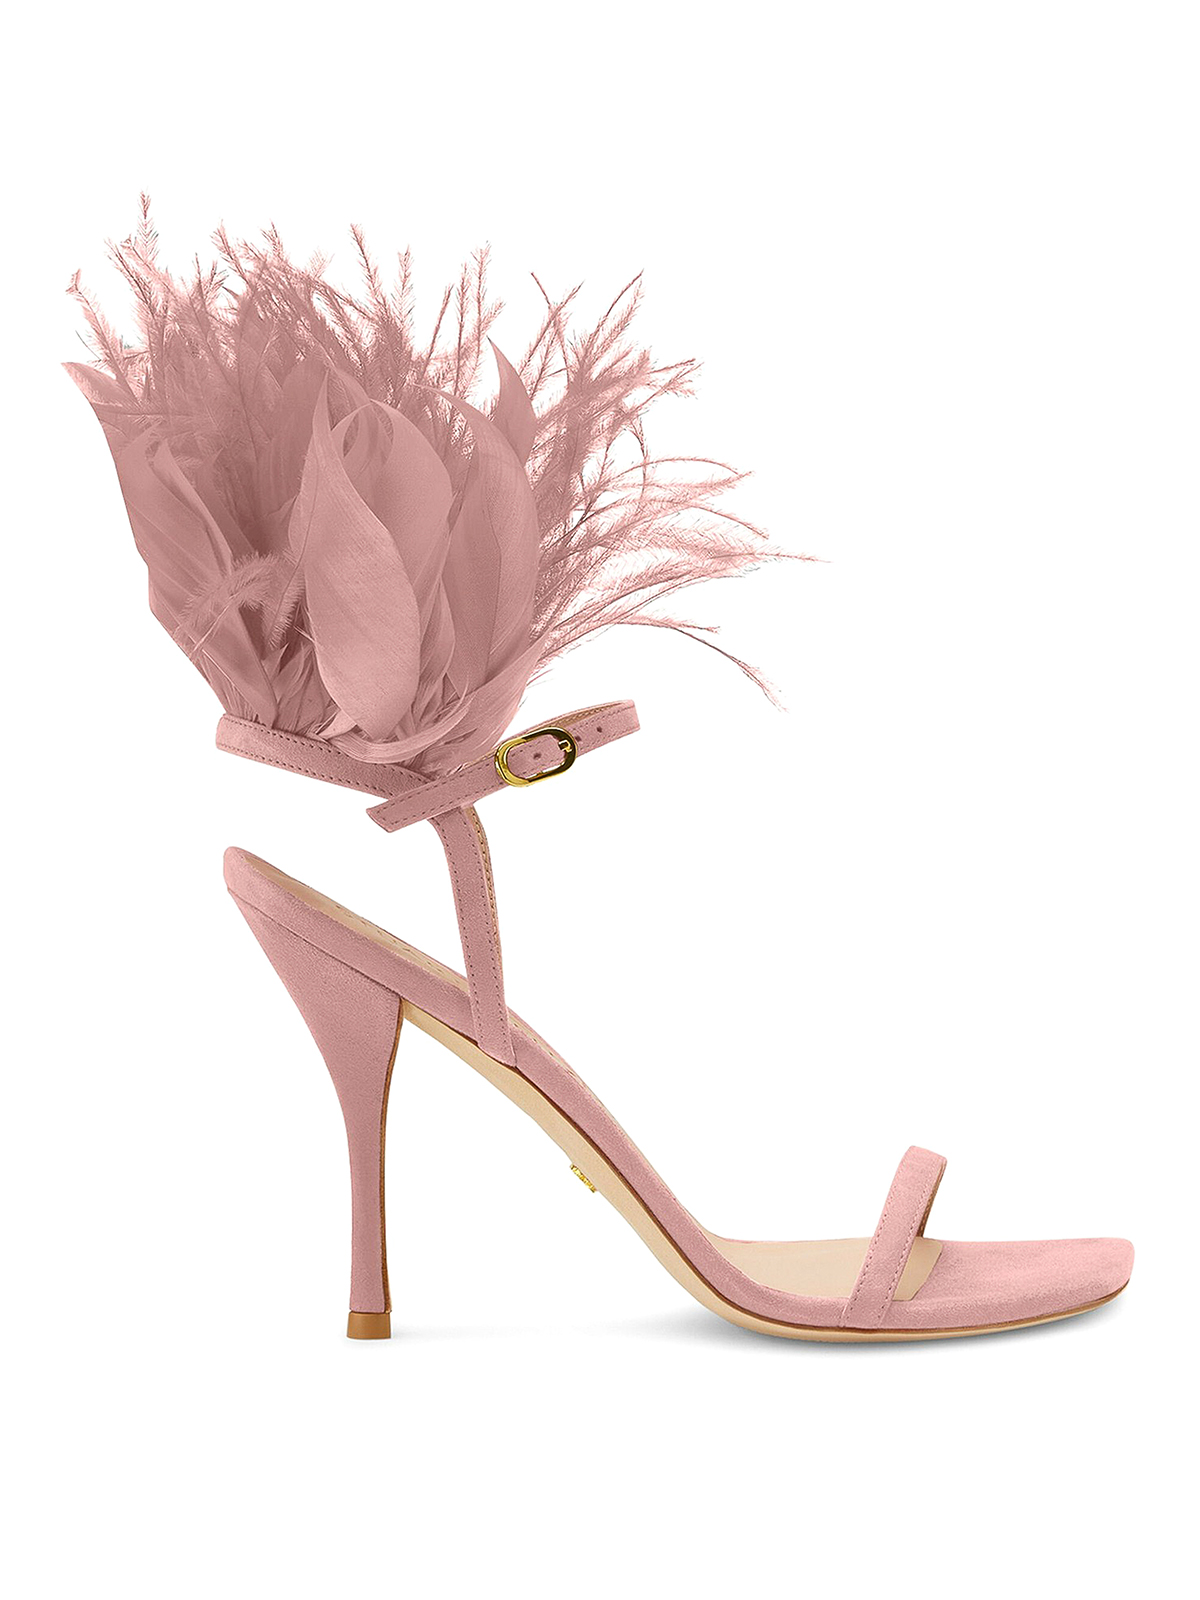 Stuart Weitzman Strap Sandals Decorated With Feathers In Pink